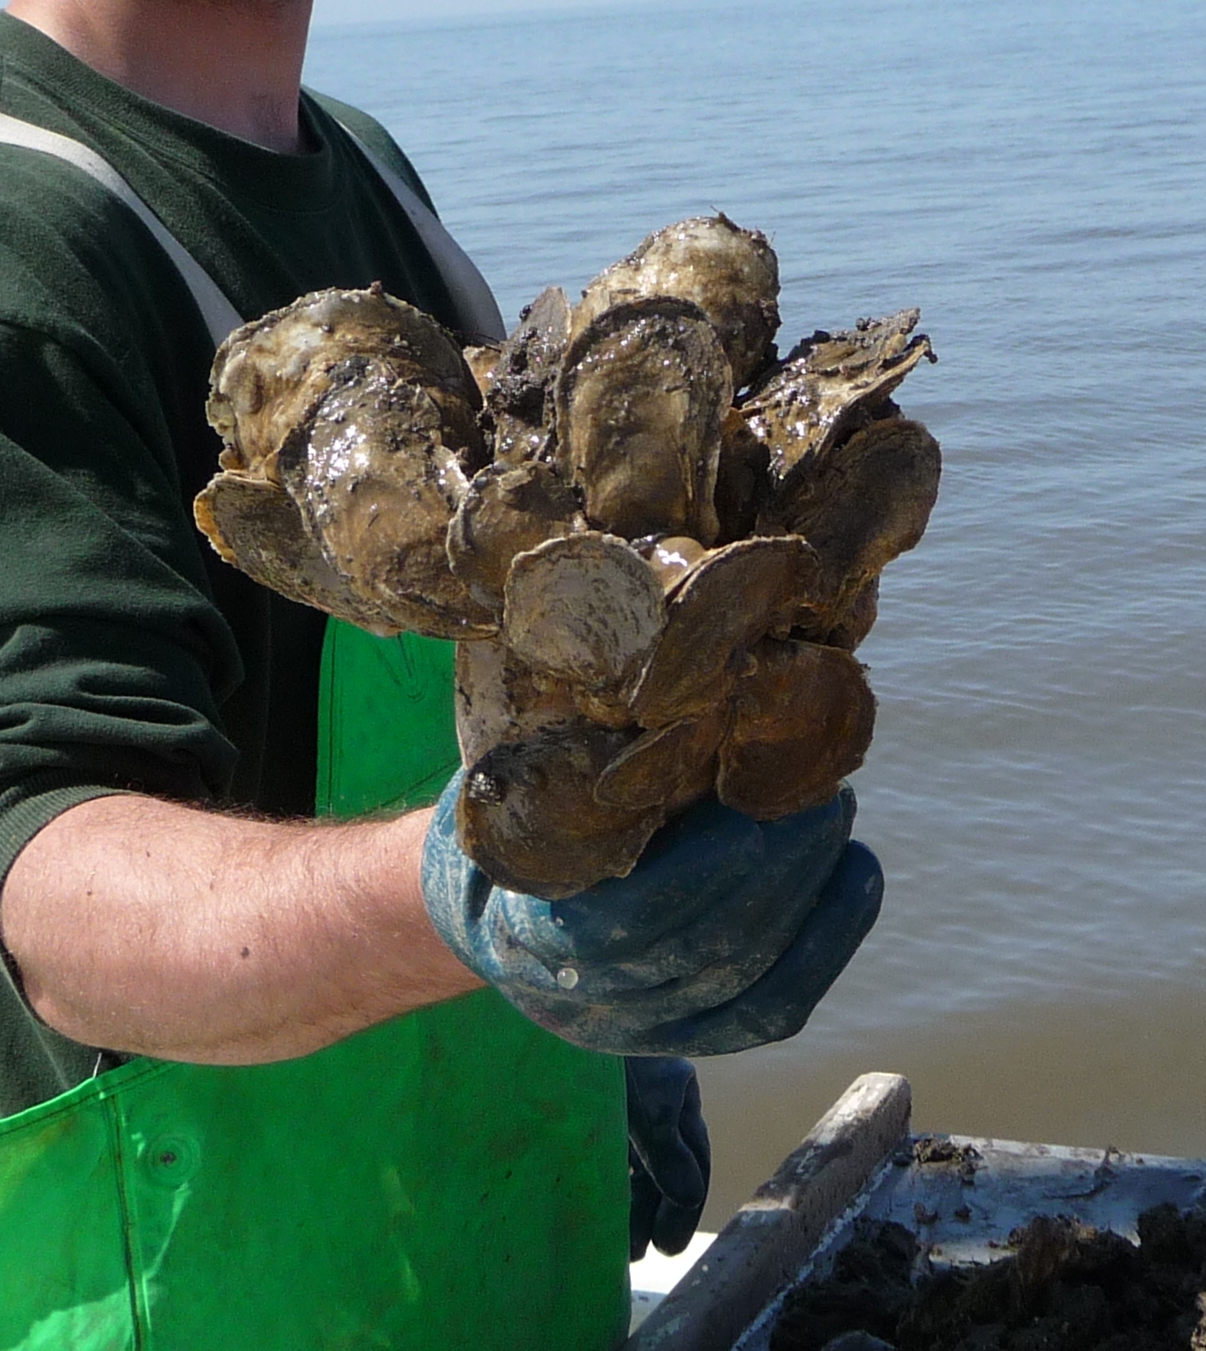 A cluster of eastern oysters (Crassostrea virginica) from Delaware Bay. Credit: Iris Burt